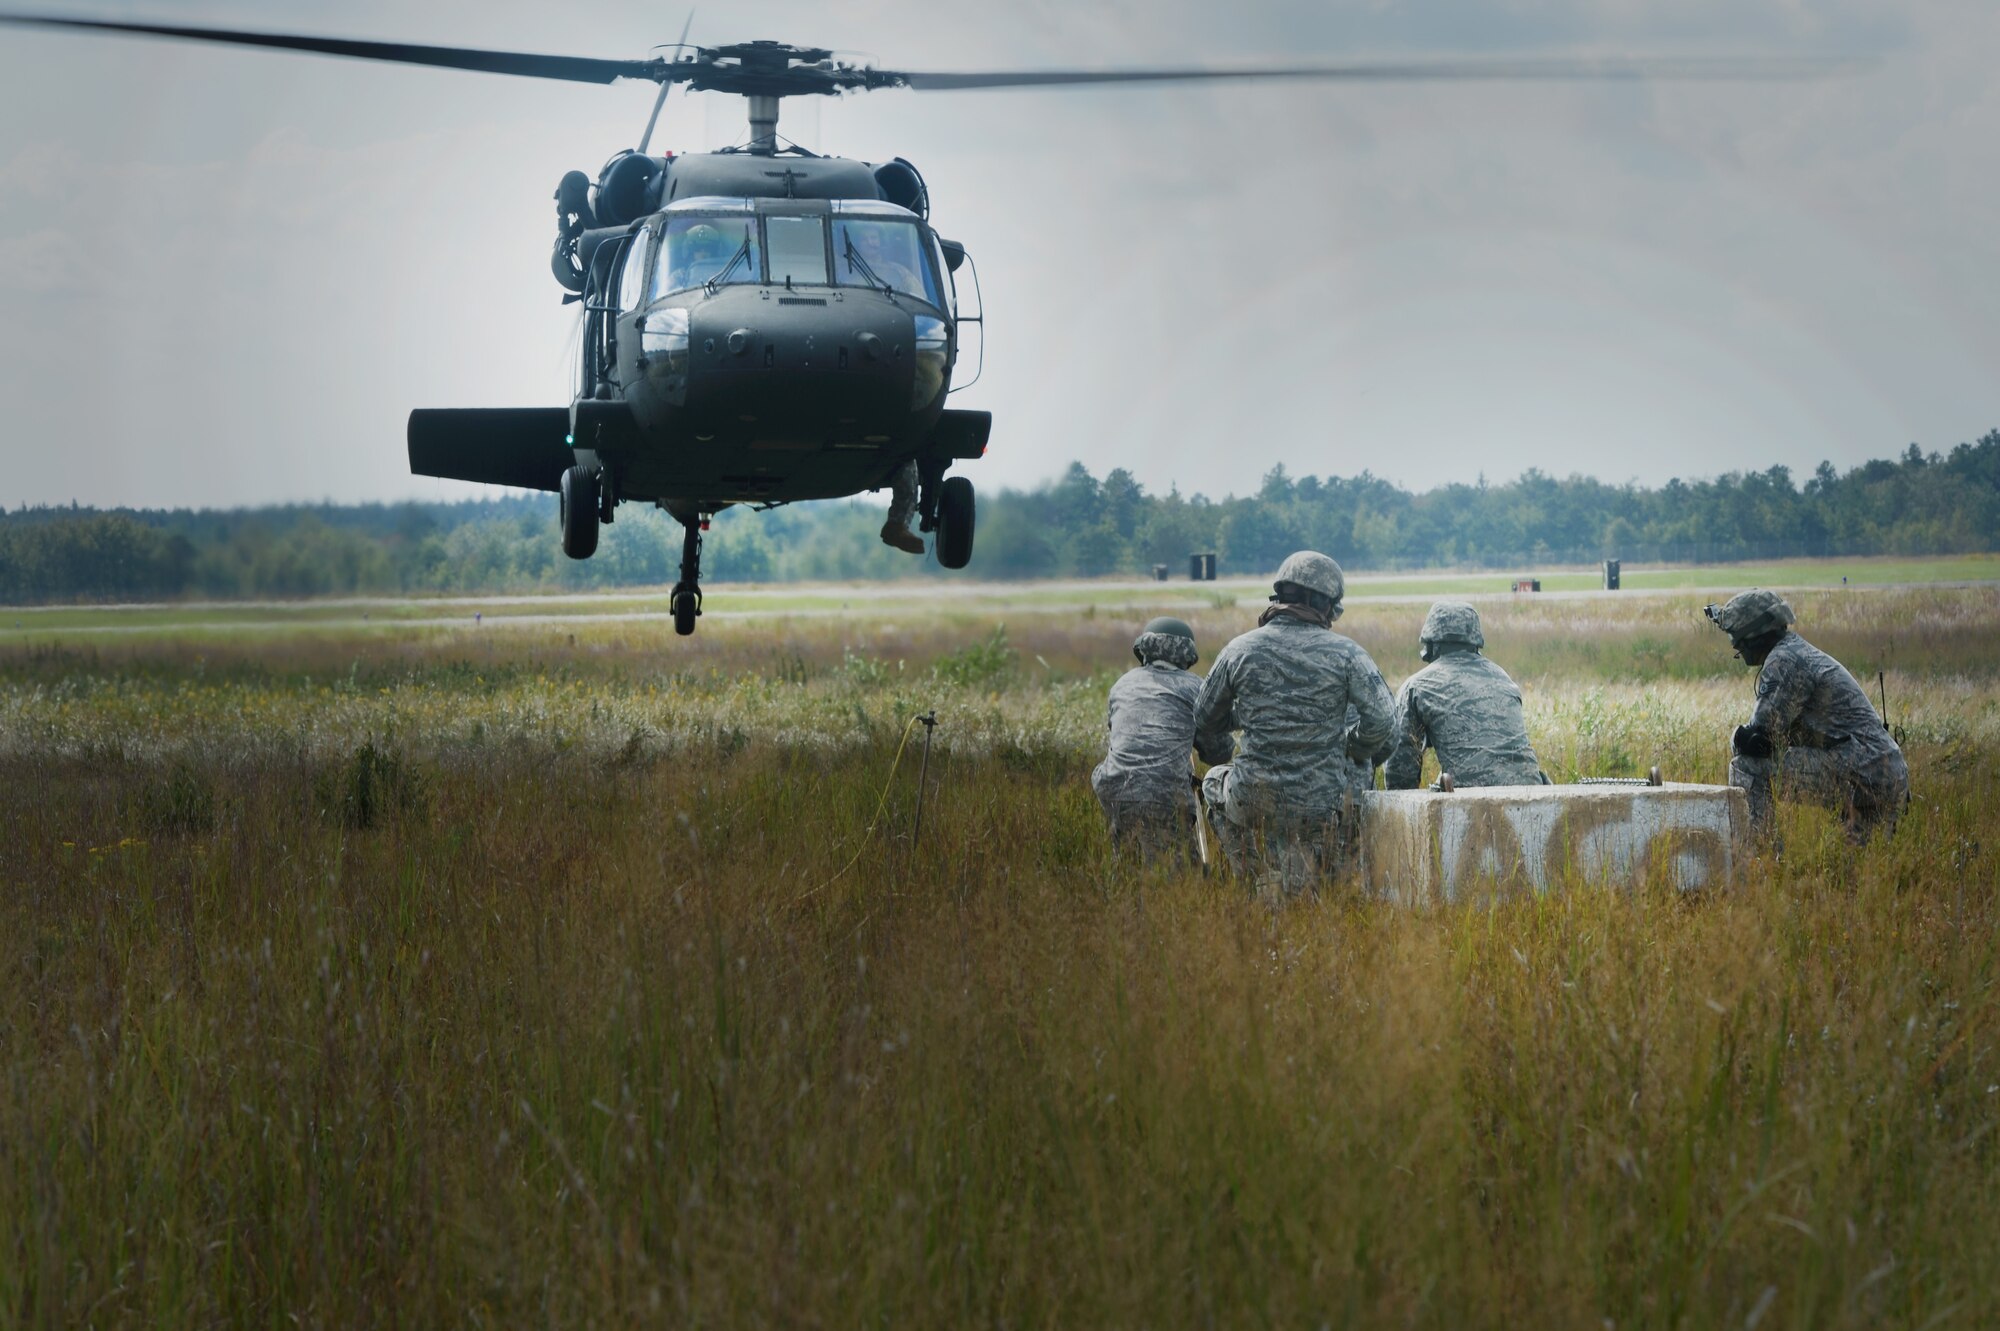 JOINT BASE MCGUIRE-DIX-LAKEHURST, N.J. -- Members of the 621 Contingency Response Wing wait for a U.S. Army UH-60 Black Hawk to get closer to attach simulated cargo during the revamped sling-load training here, Sept. 16, 2014. The new sling-load training is scheduled to be conducted quarterly. (U.S. Air Force photo by Staff Sgt. Gustavo Gonzalez)